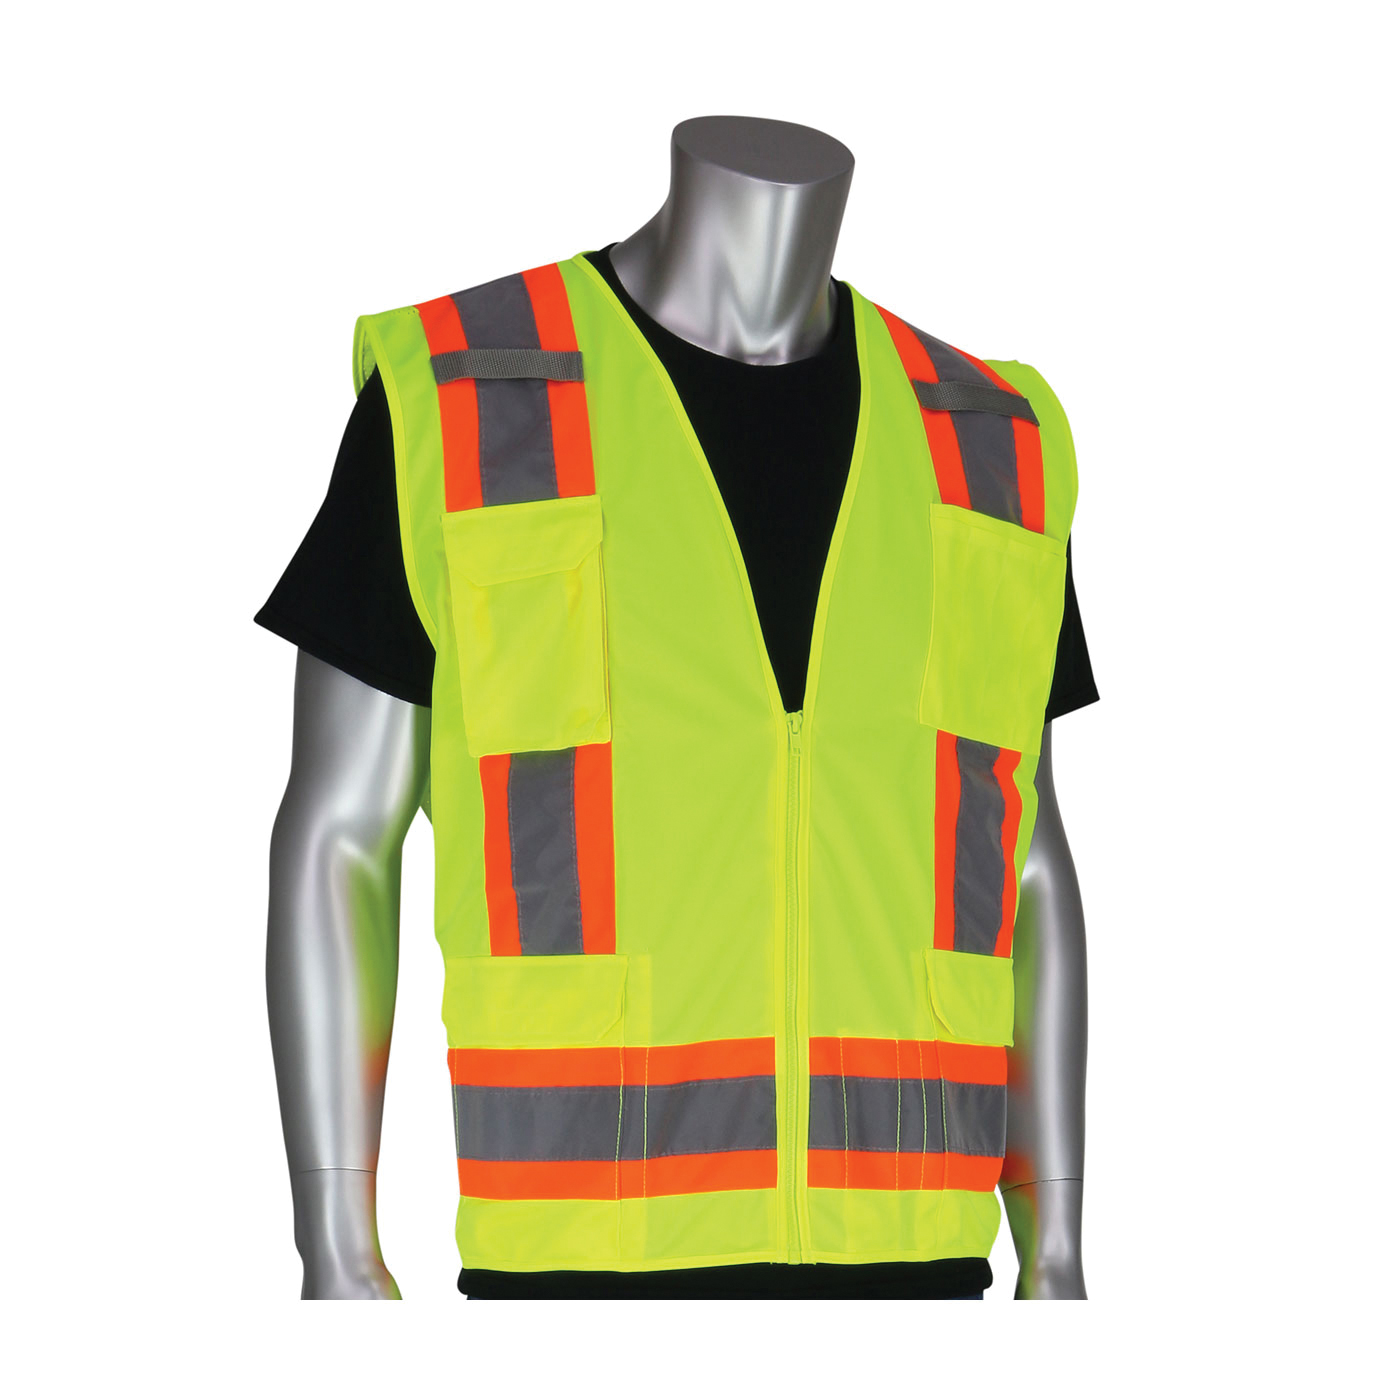 PIP® 302-0500-YEL/L 2-Tone Surveyor Safety Vest, L, Hi-Viz Lime Yellow, Polyester/Solid Tricot, Zipper Closure, 11 Pockets, ANSI Class: Class 2, Specifications Met: ANSI 107 Type R